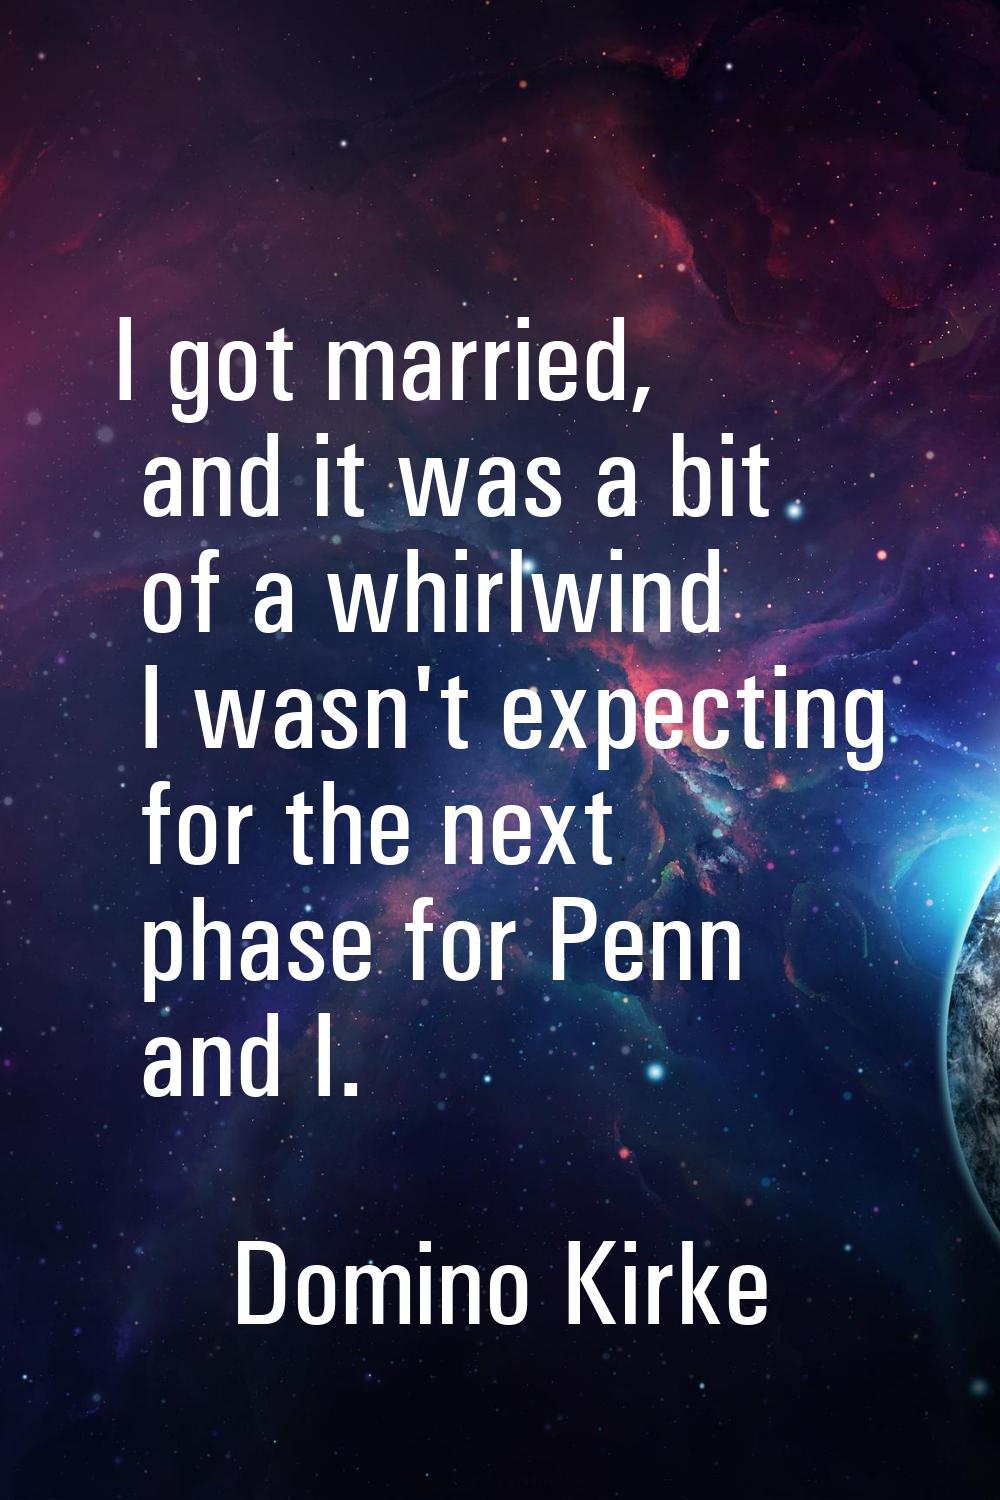 I got married, and it was a bit of a whirlwind I wasn't expecting for the next phase for Penn and I